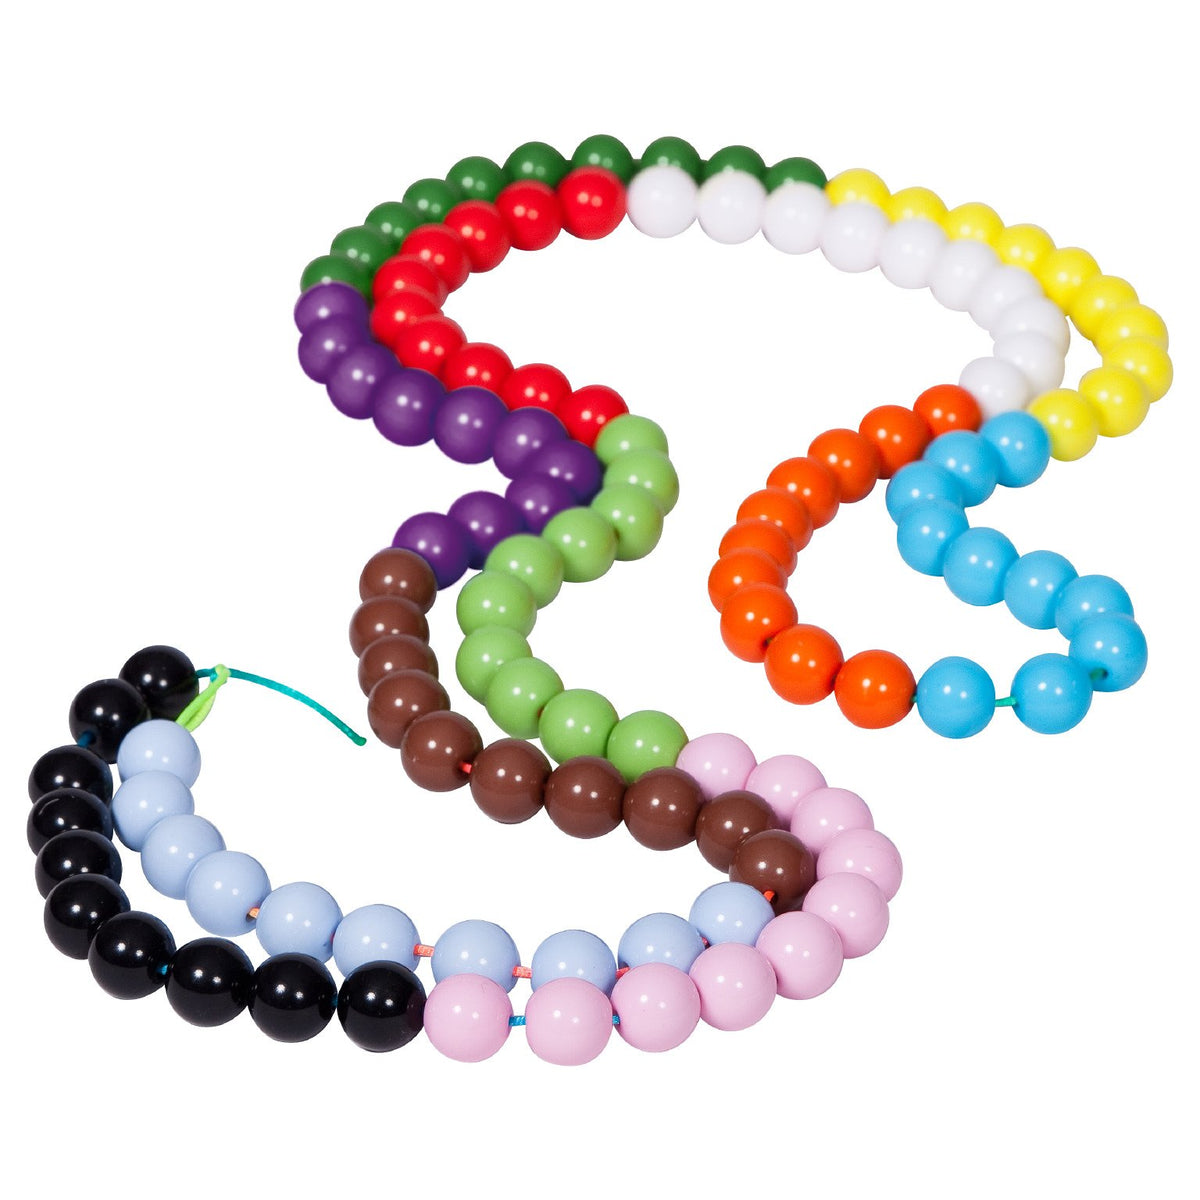 You are looking for an 120 Bead String Elizabeth Richards to